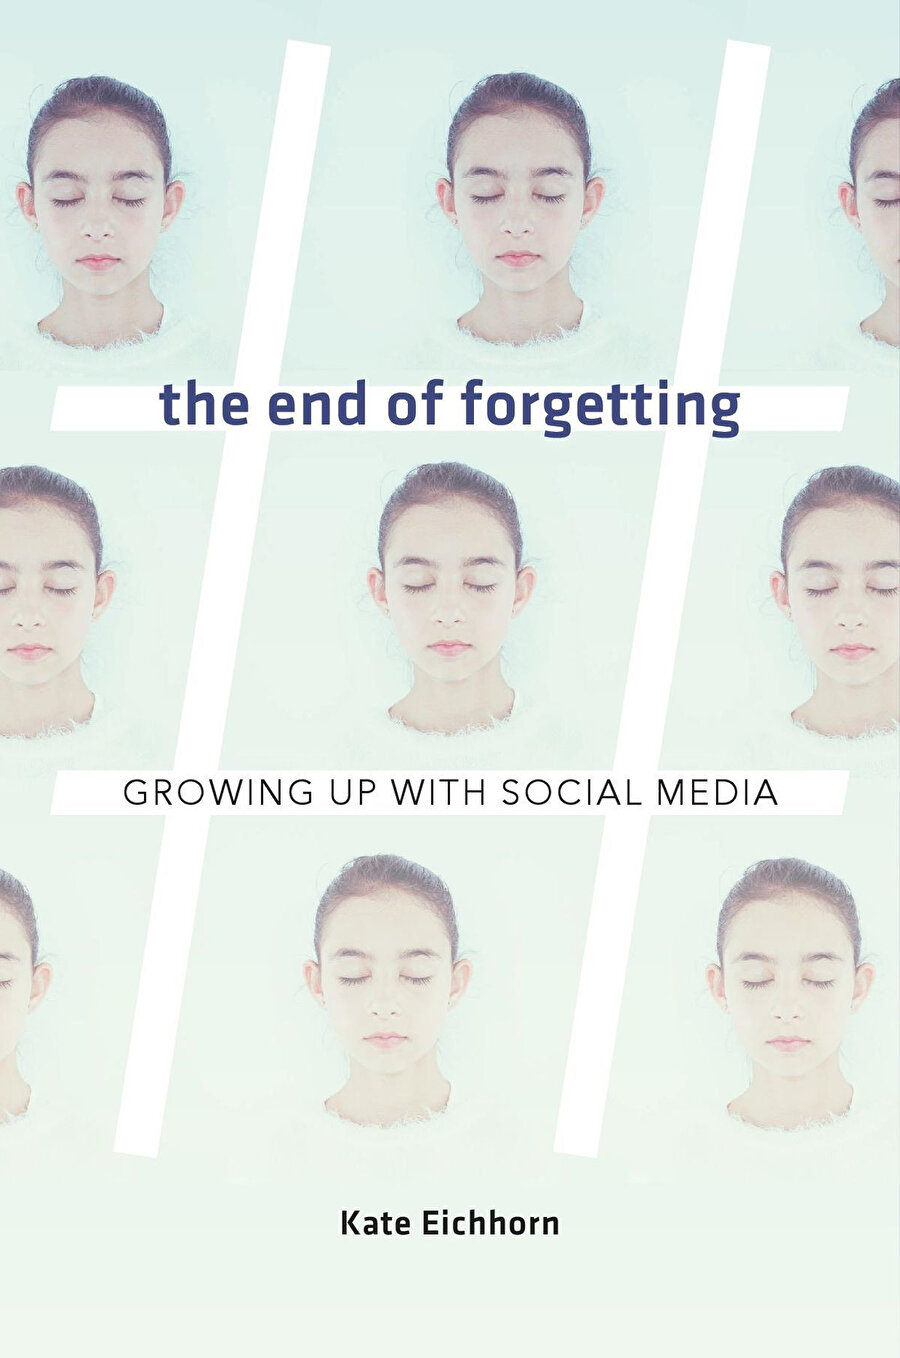 The End of Forgetting: Growing Up with Social Media, Kate Eichhorn, Harvard University Press, 2019, 192 s.